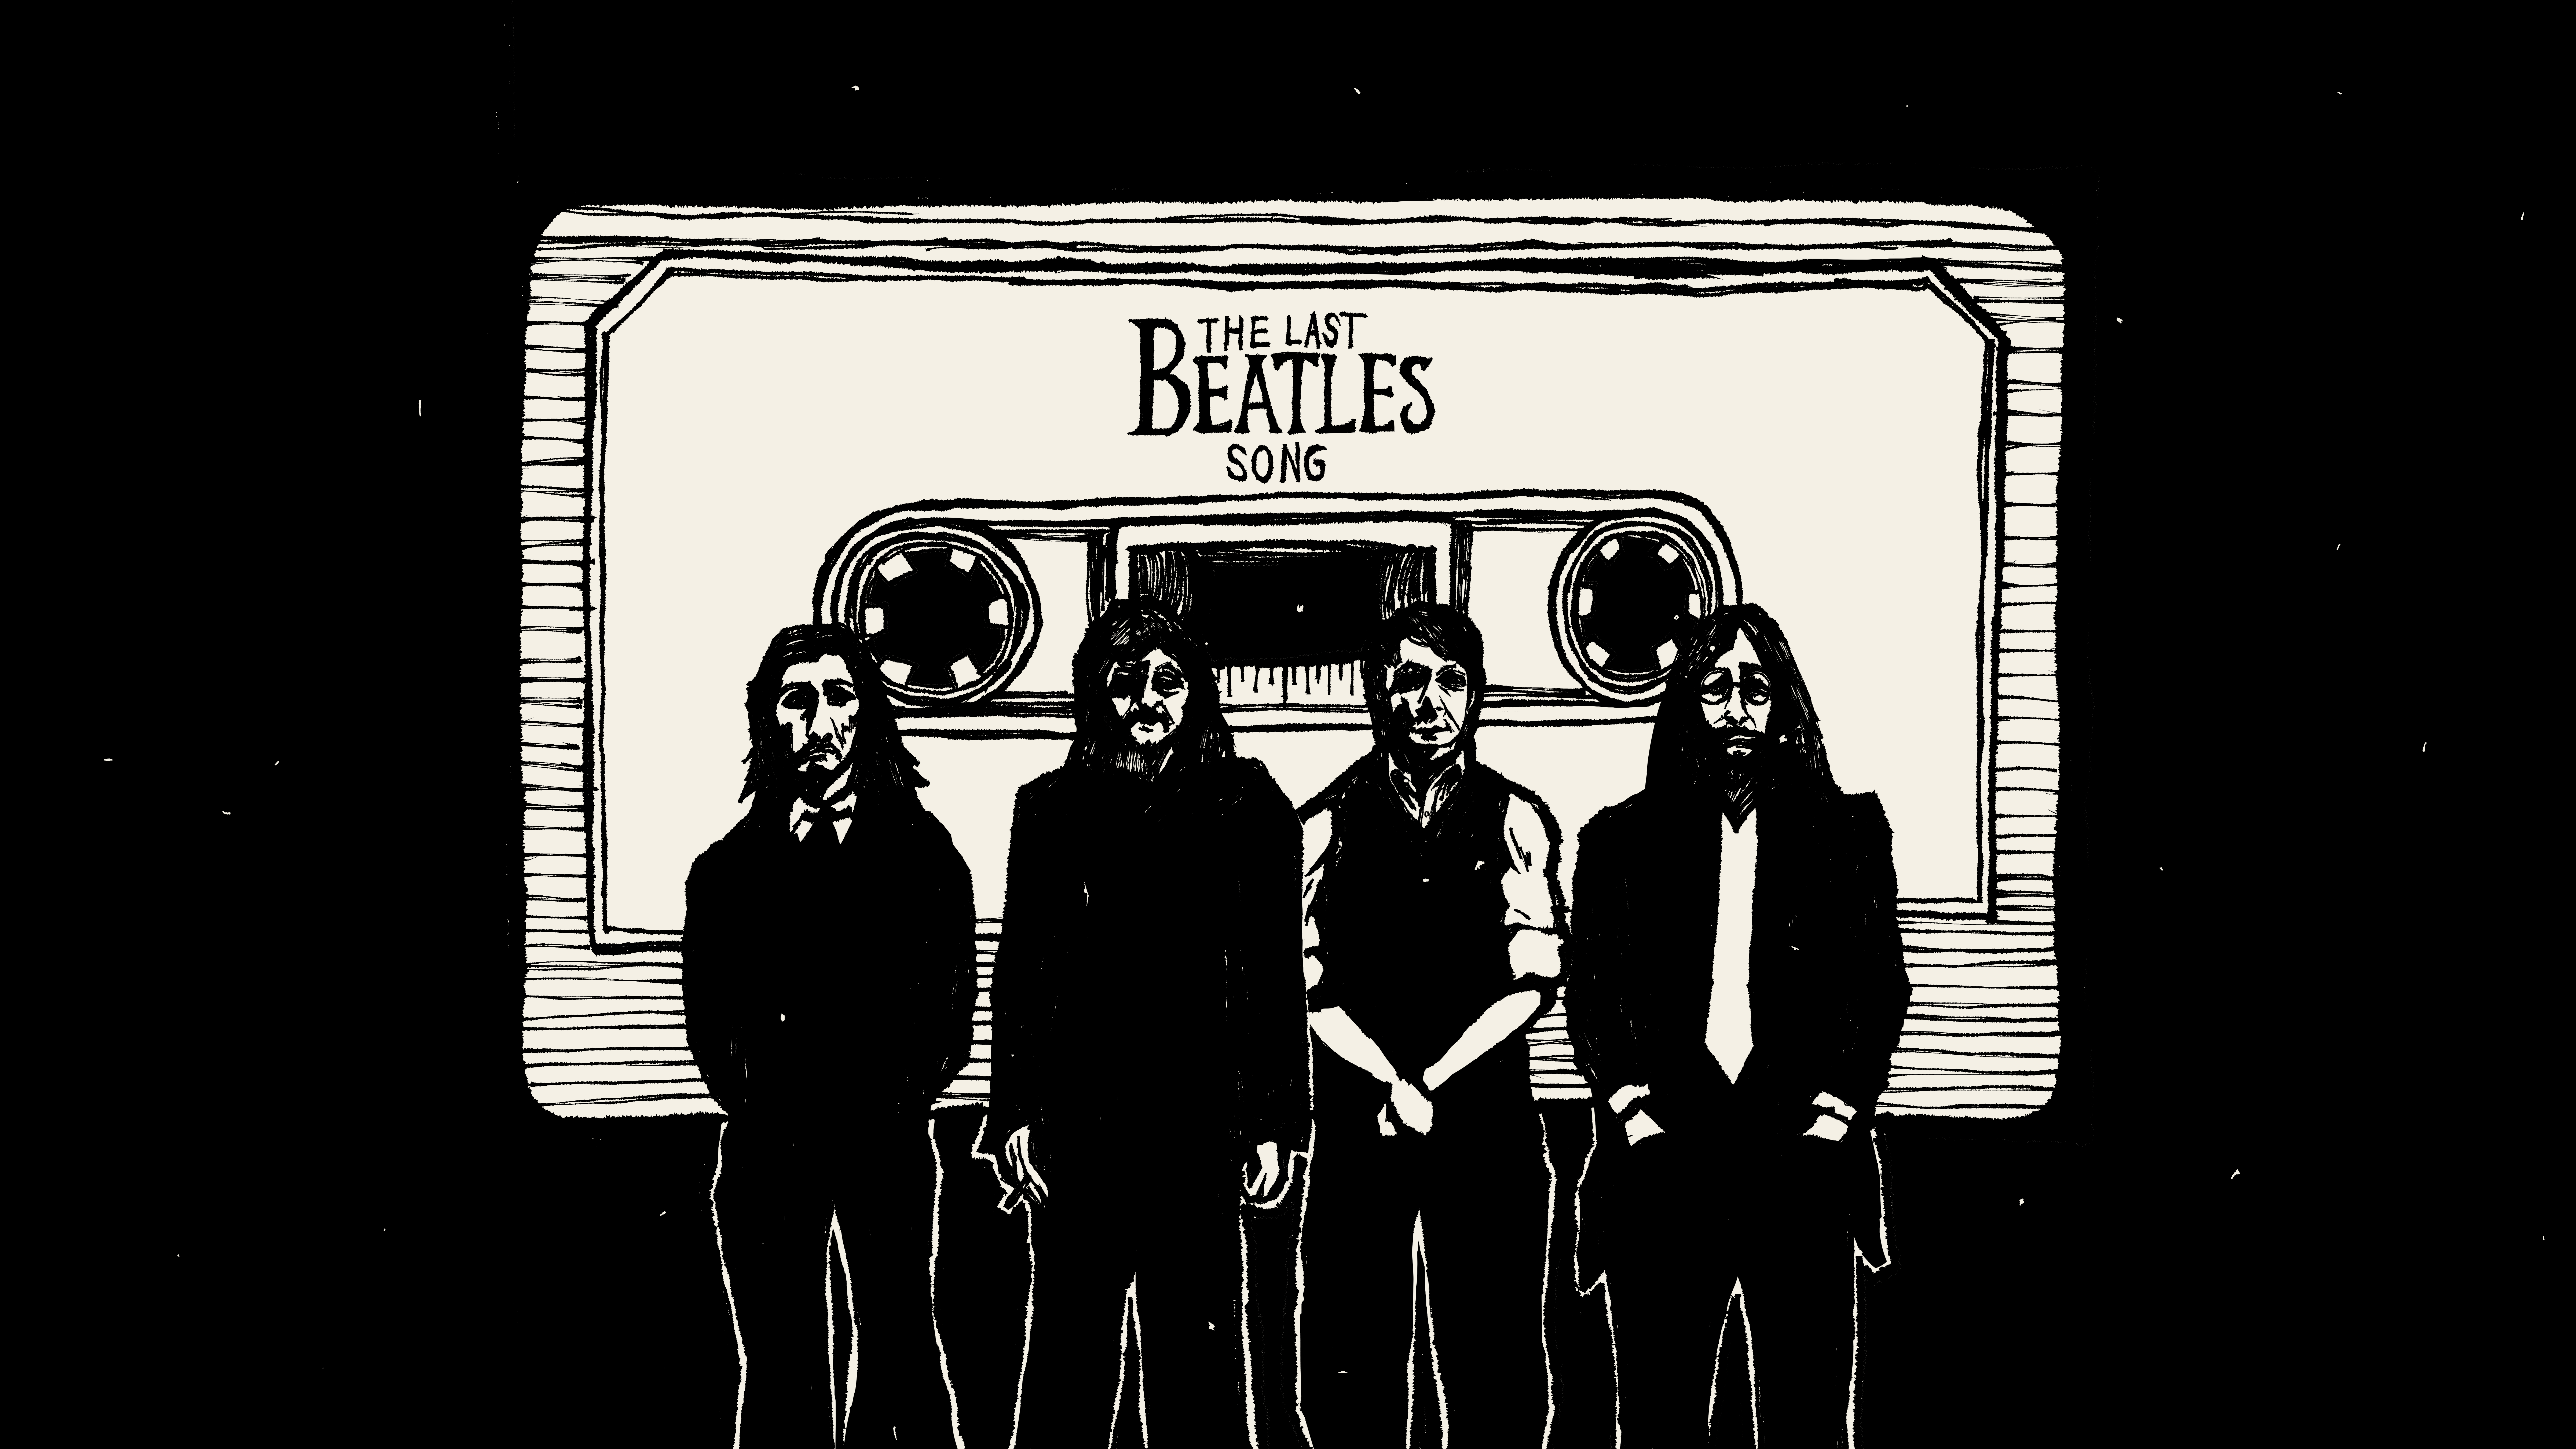 Black-and-white illustration of The Beatles standing in front of a cassette tape